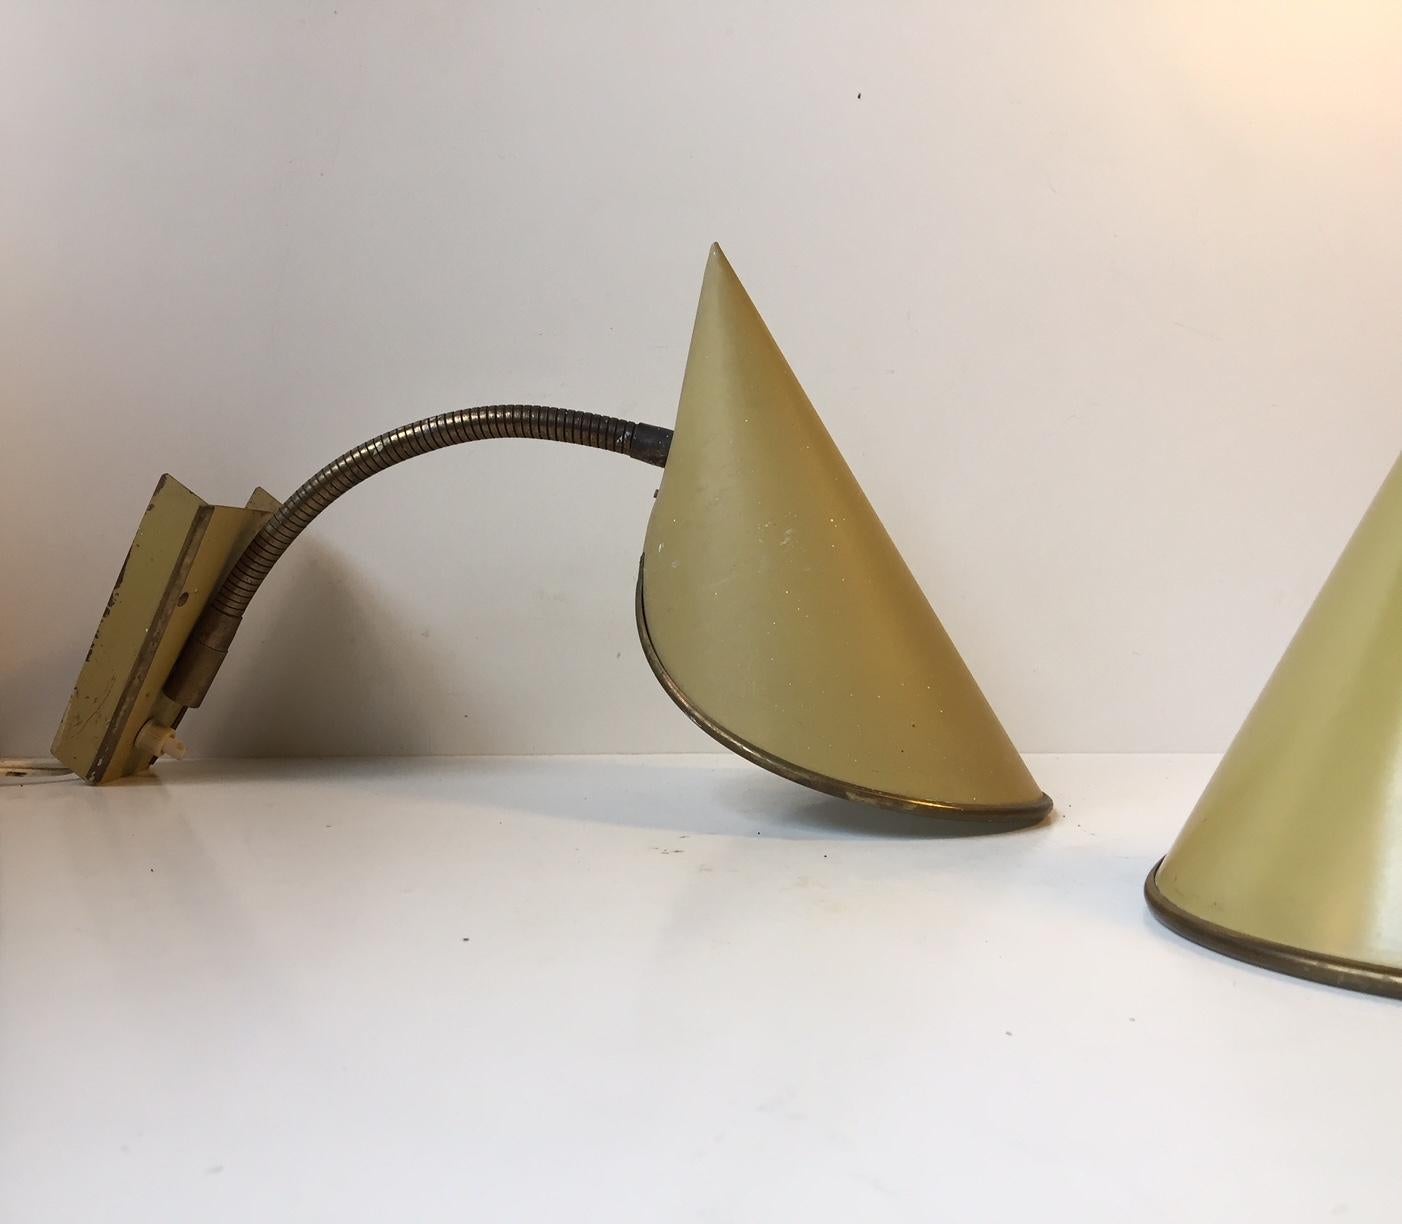 Pair of Danish Modern Pointy Yellow Wall Lamps by Fog & Mørup, 1950s (Dänisch)